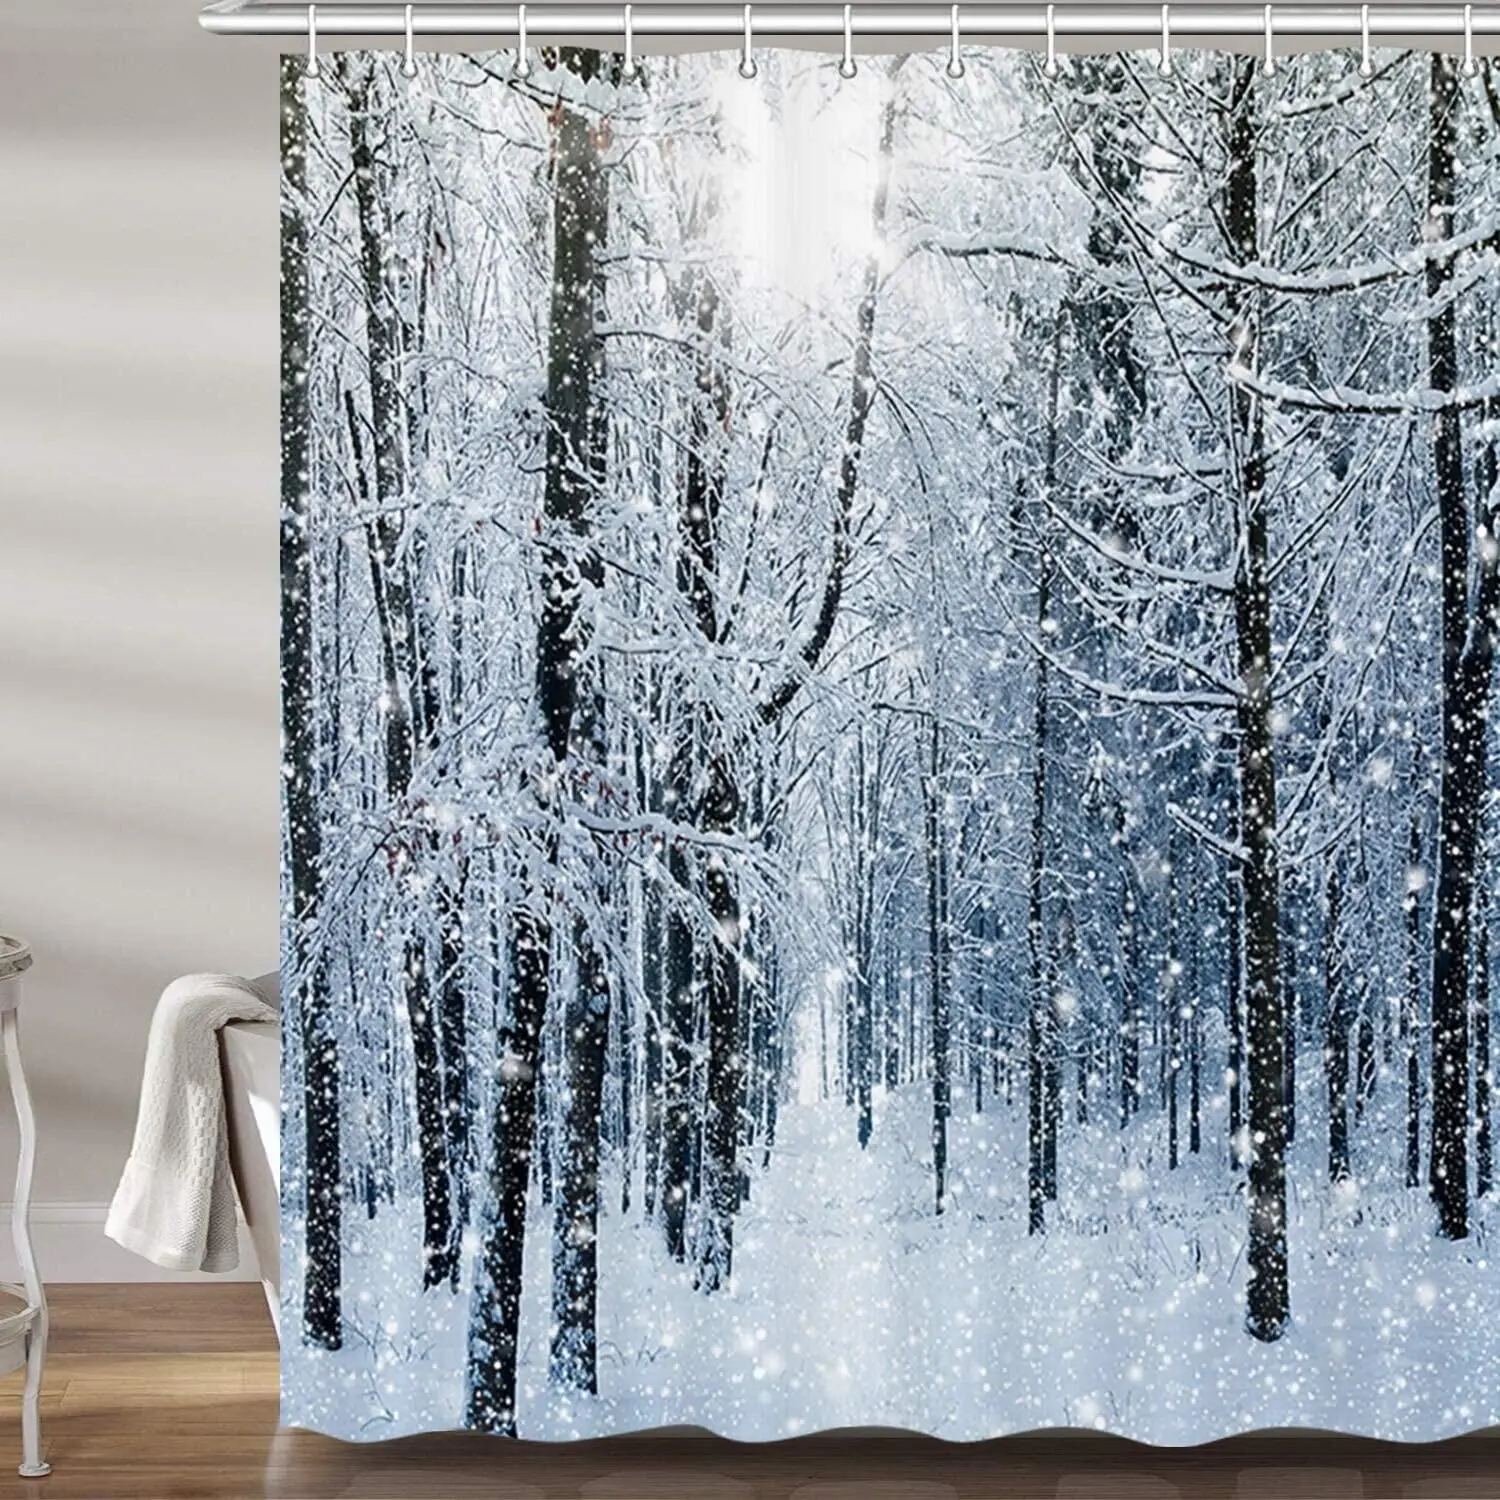 

Winter Snow Forest Shower Curtain, White Trees Woods Rustic Nature Scene Bath Curtains Set,Polyester Fabric Bathroom Decor Hooks